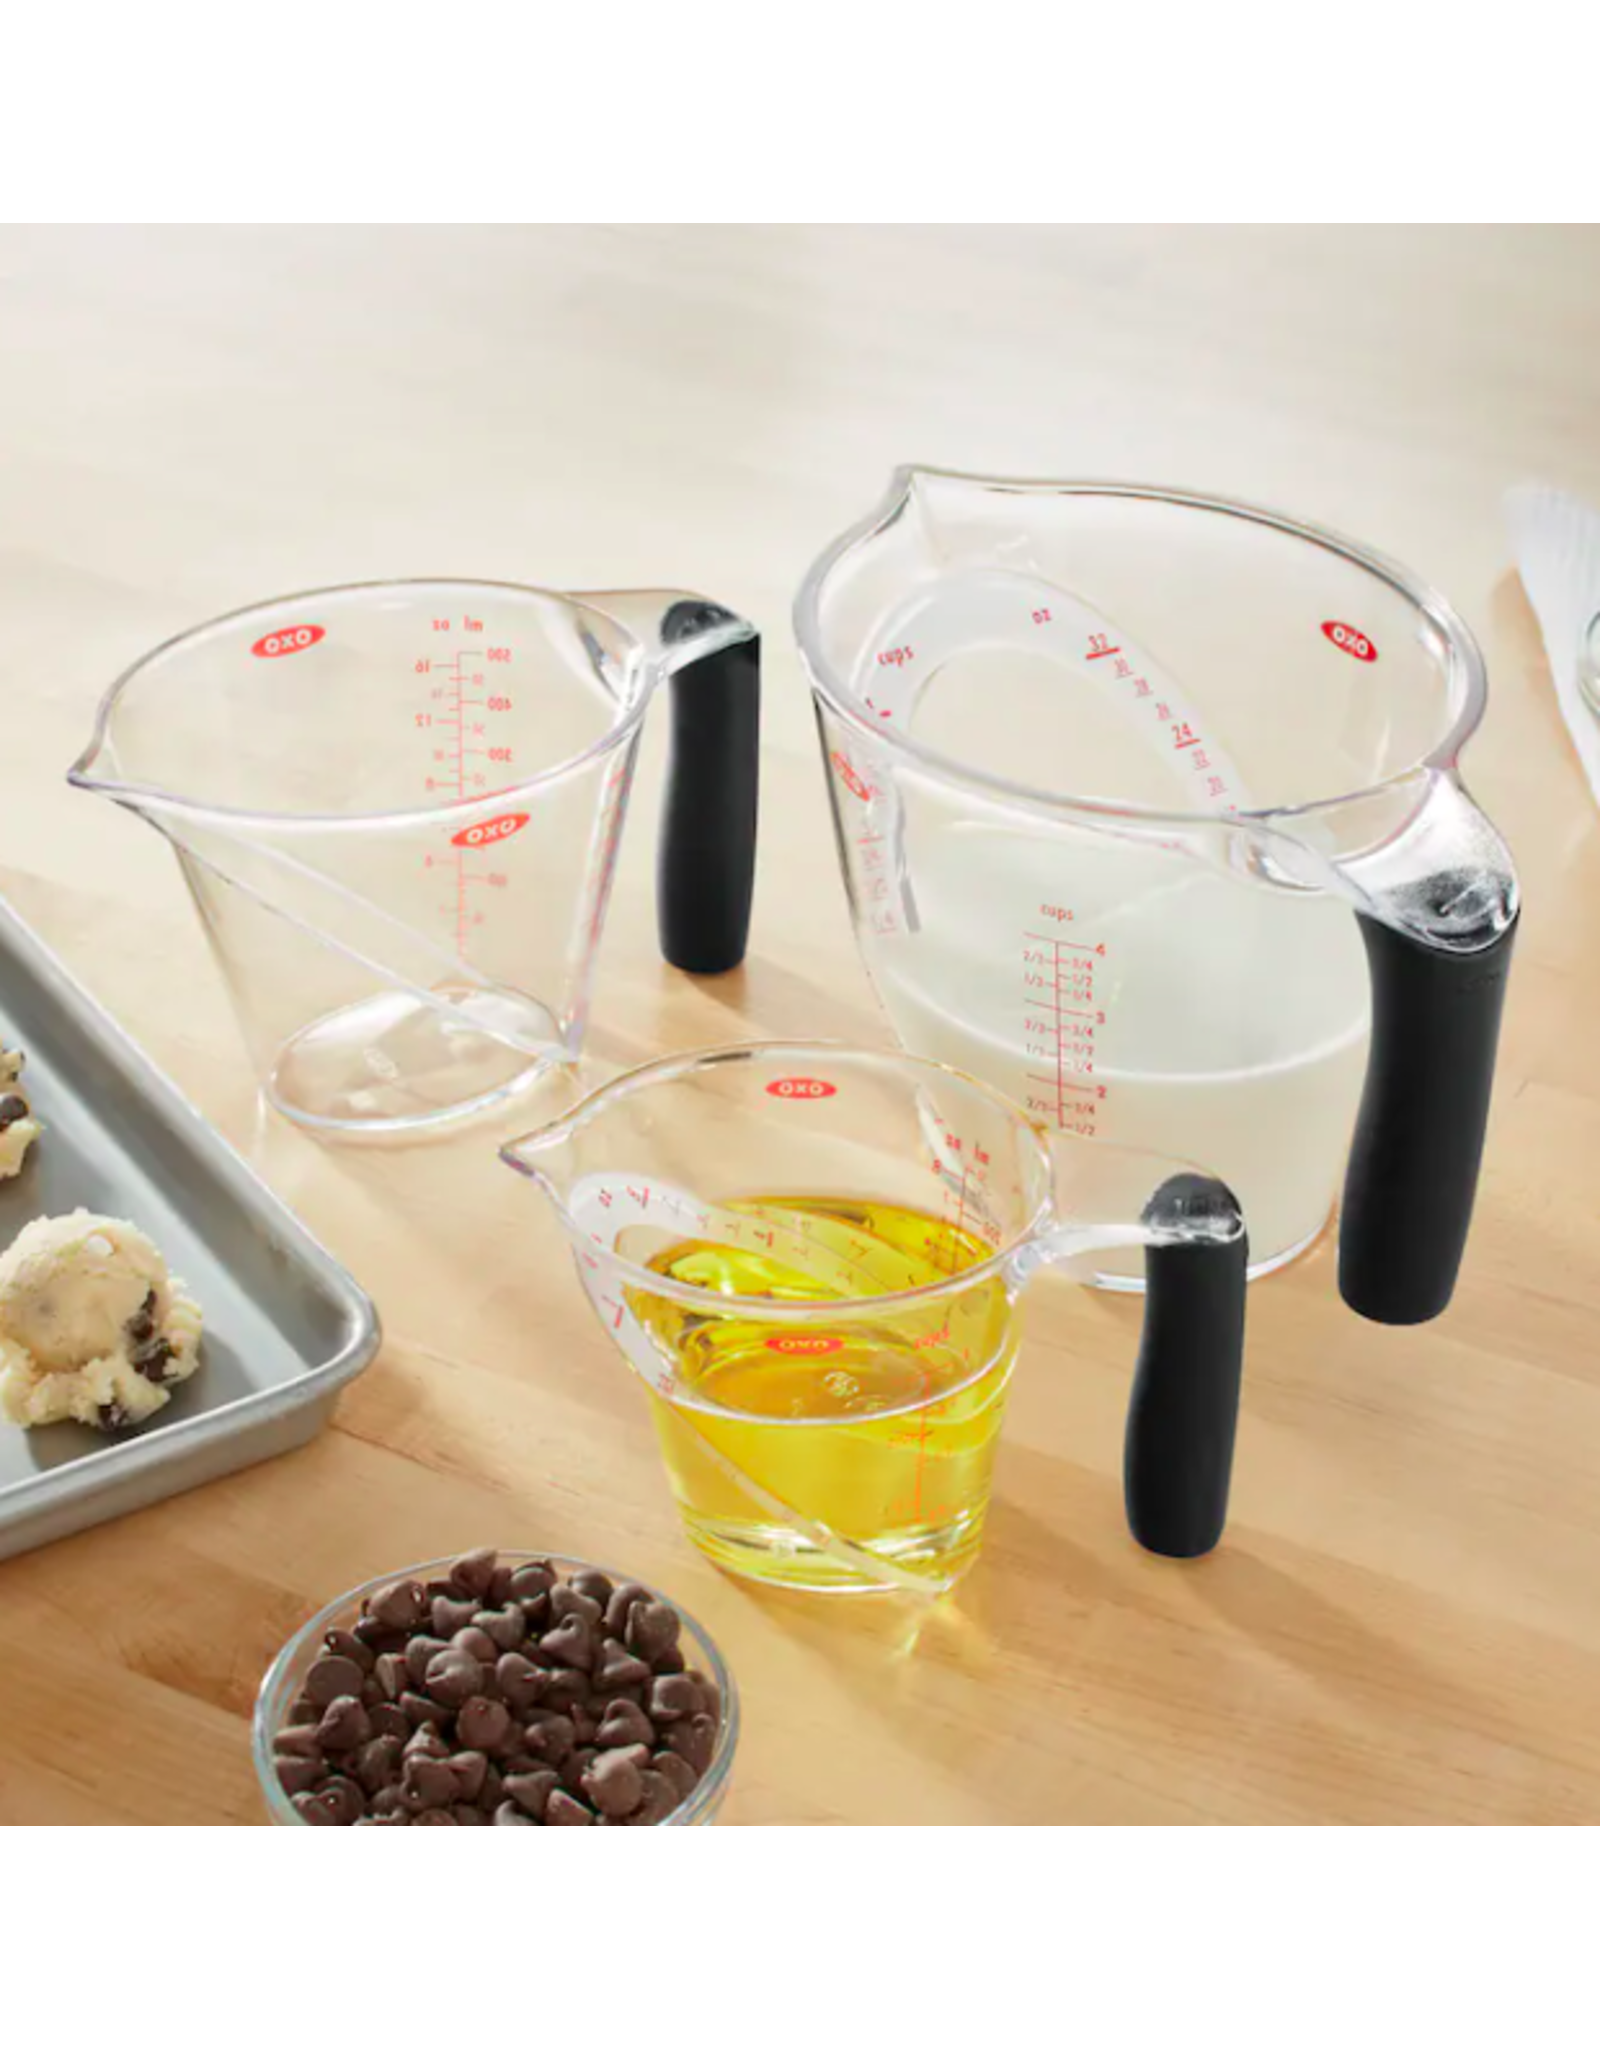 Oxo Angle Measuring Cup, Utensils